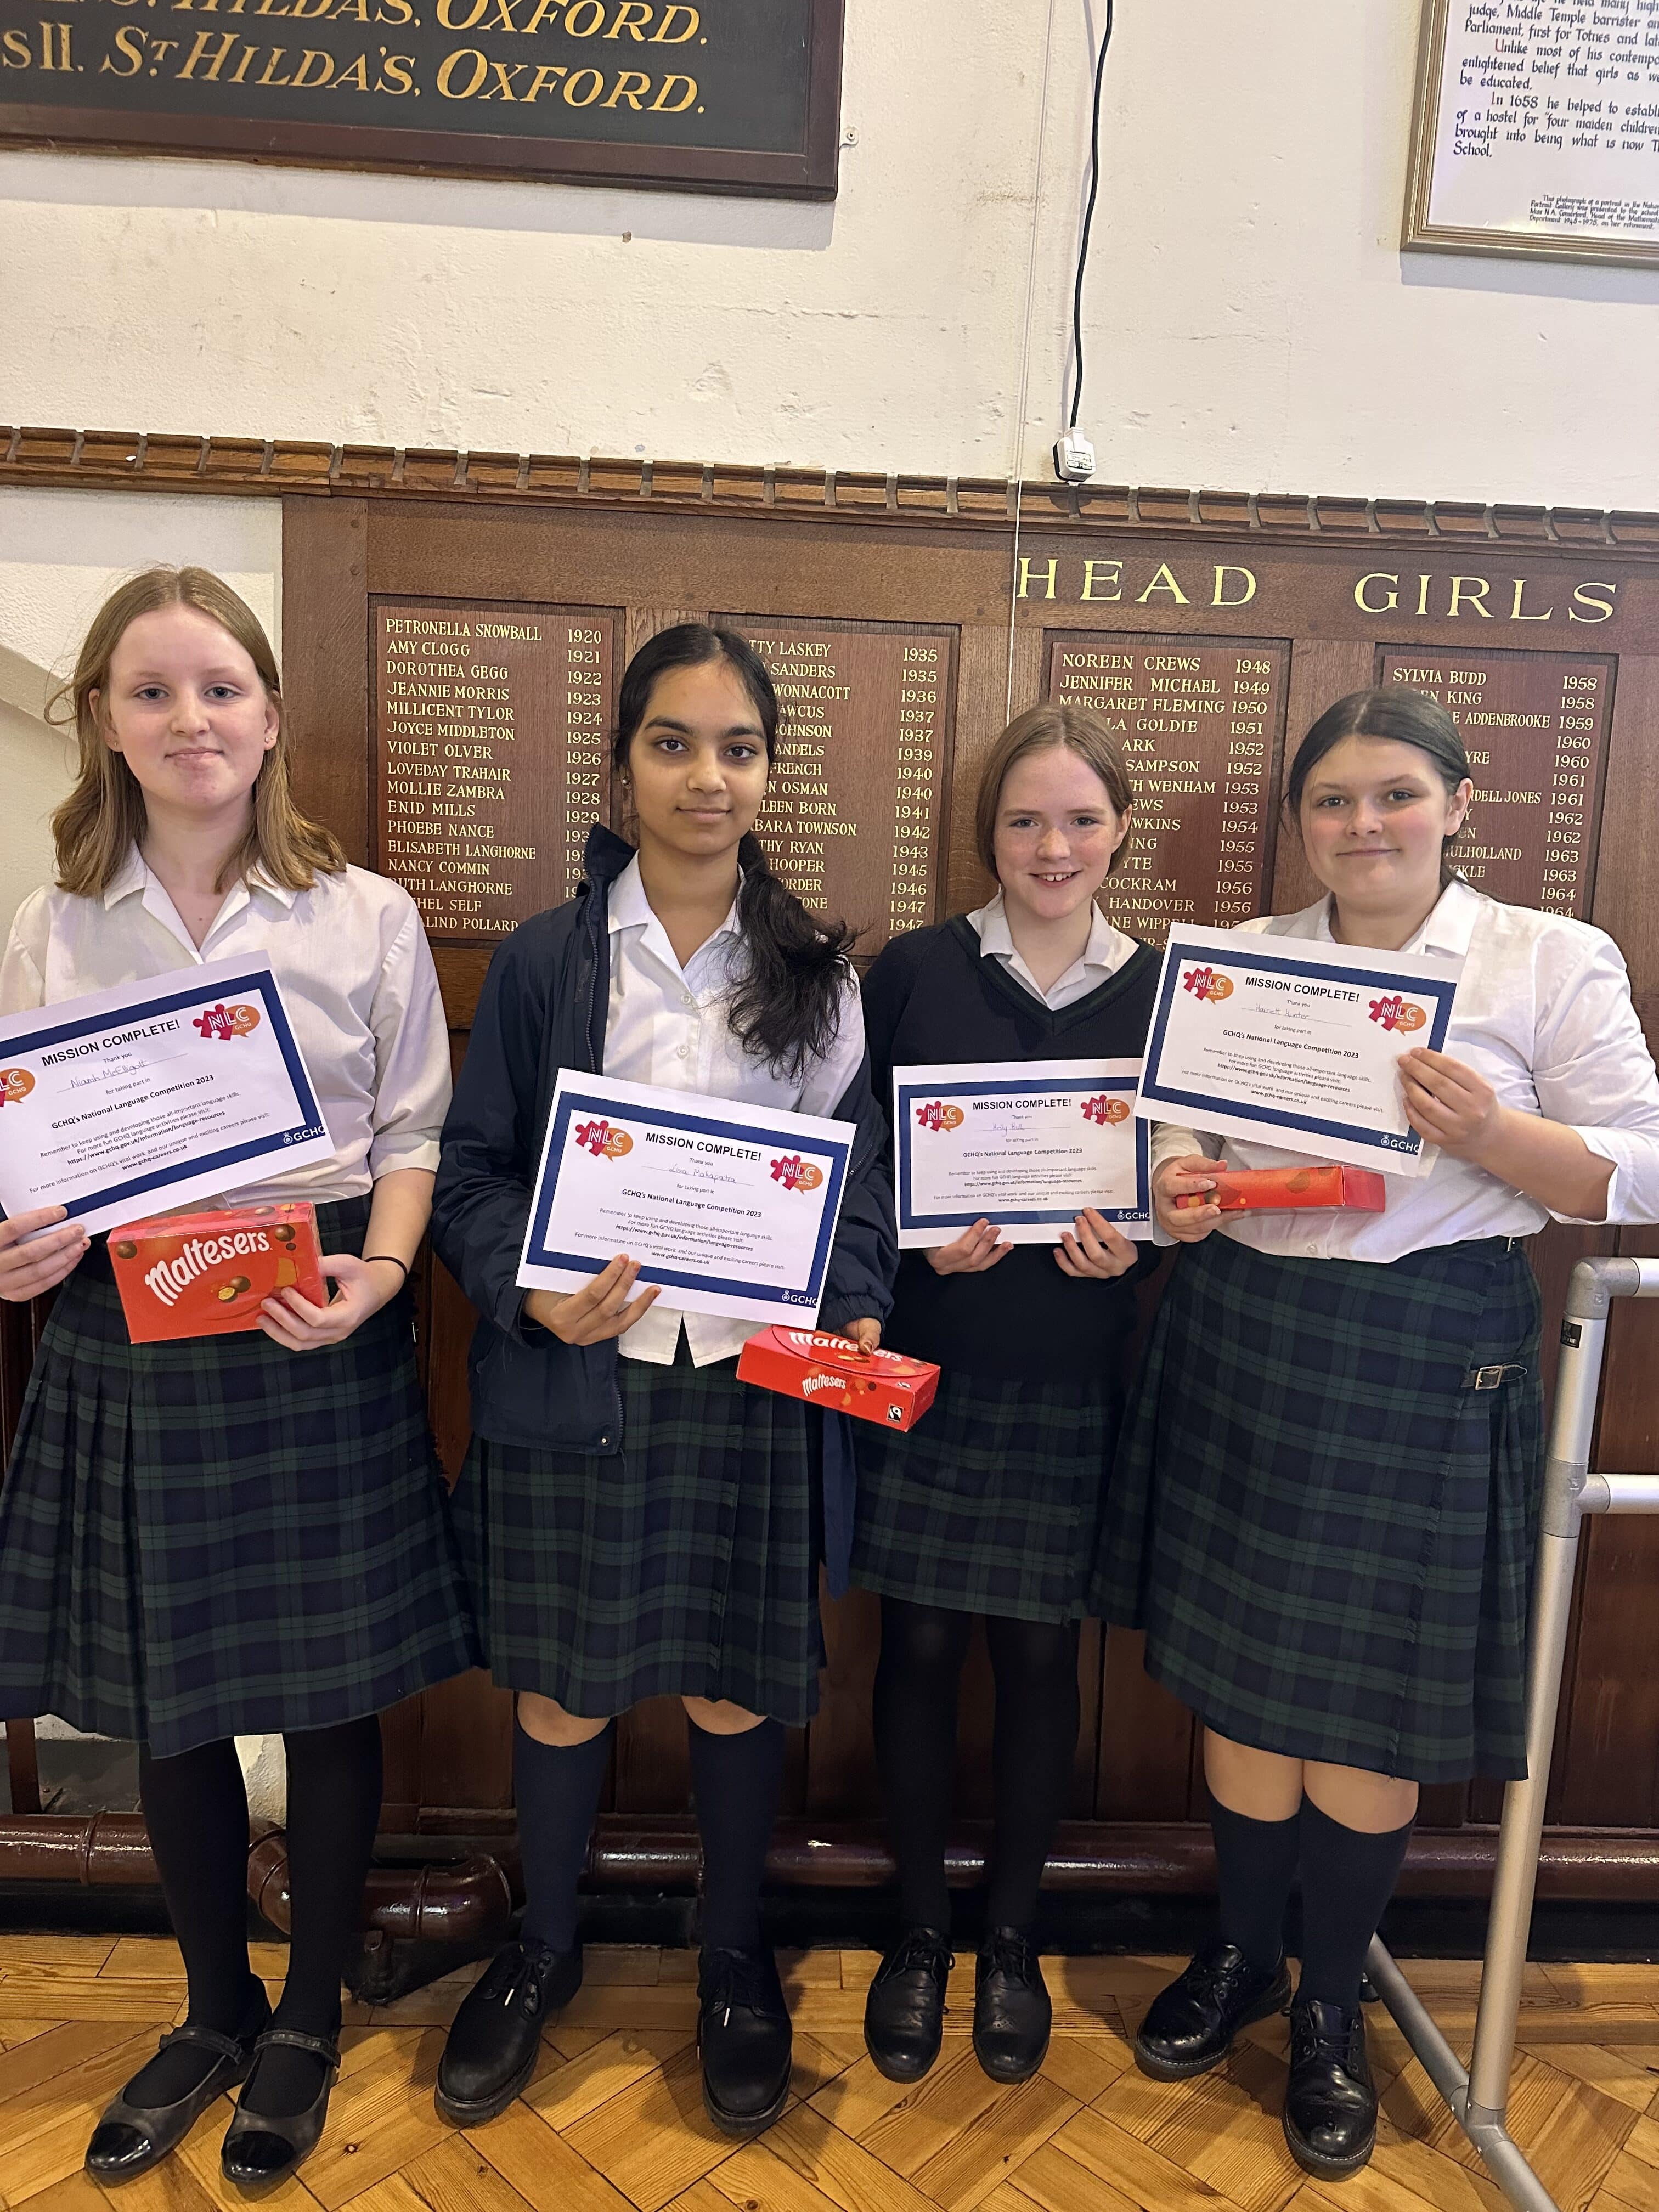 Fours girls smiling holding up certificates